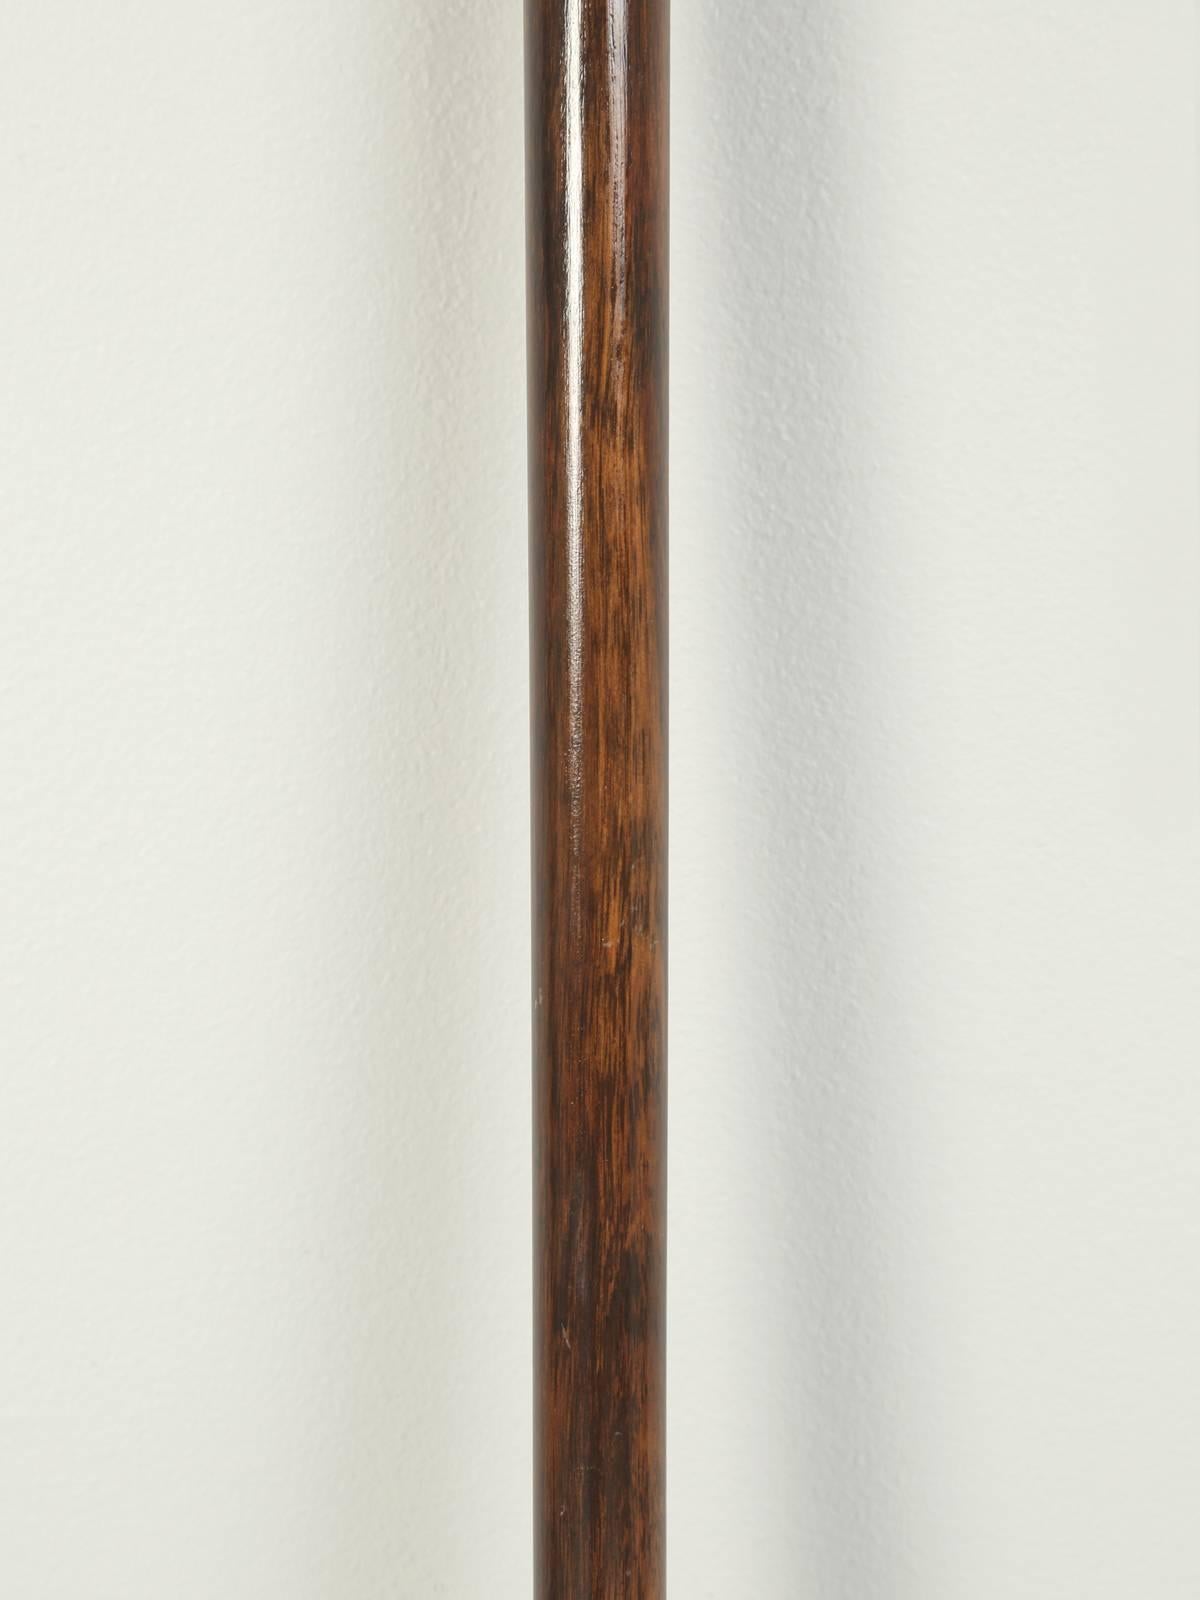 Antique French Walking Stick, or Cane with Silver Inlays 4